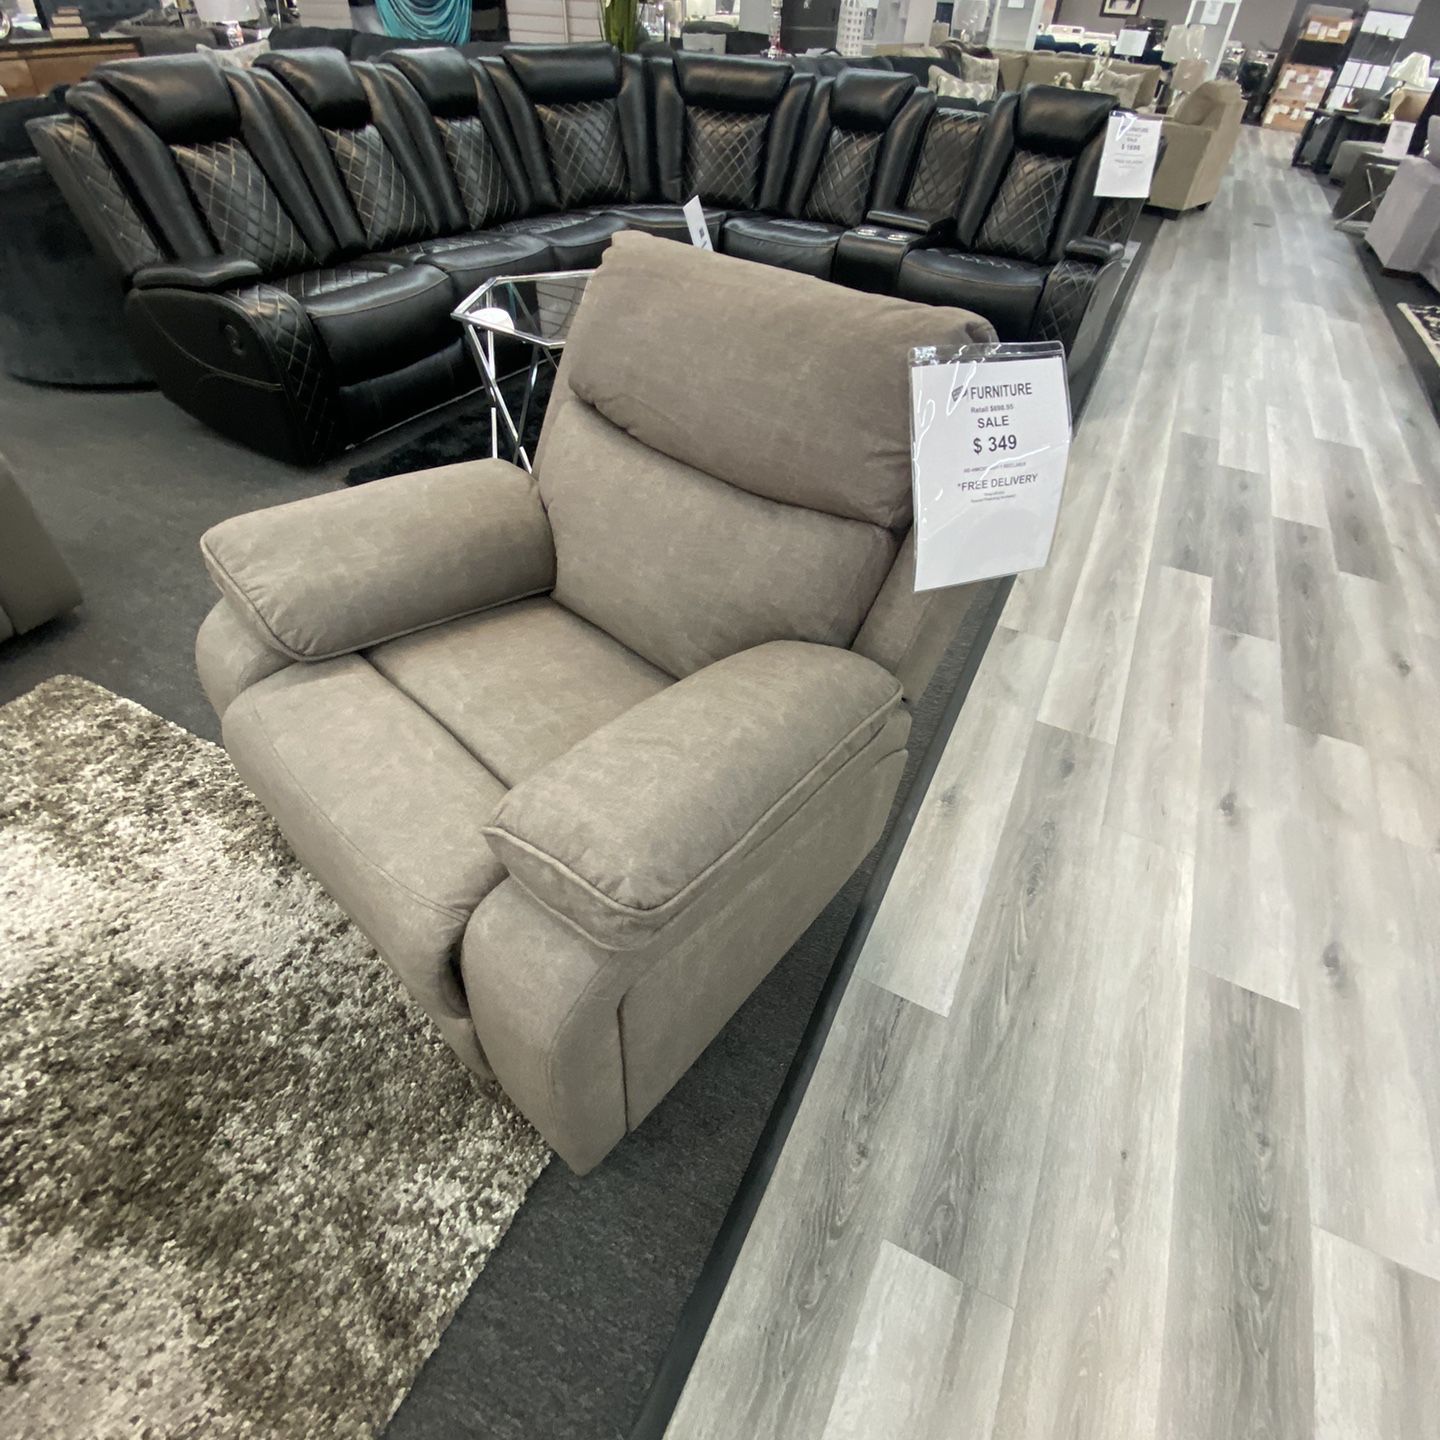 Recliner Chair New Was $699 On Sale Only 